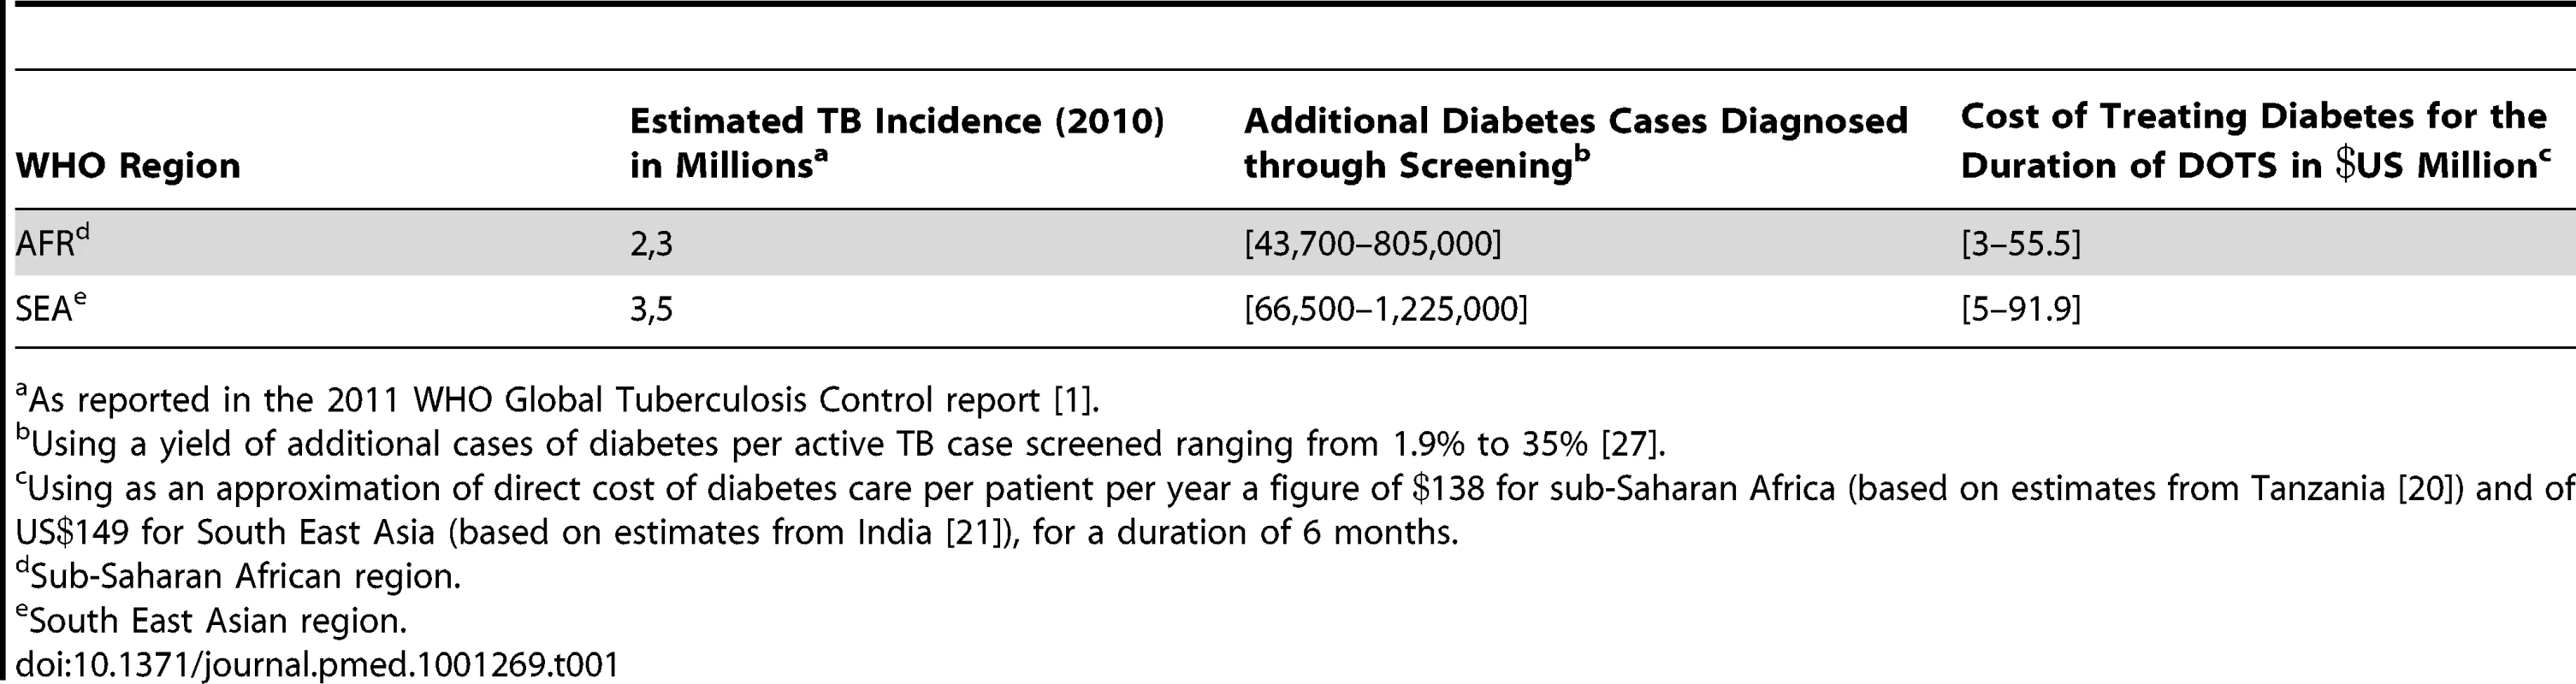 Additional funding required for diabetes care in TB patients using estimated TB incidence in Africa and South East Asia.